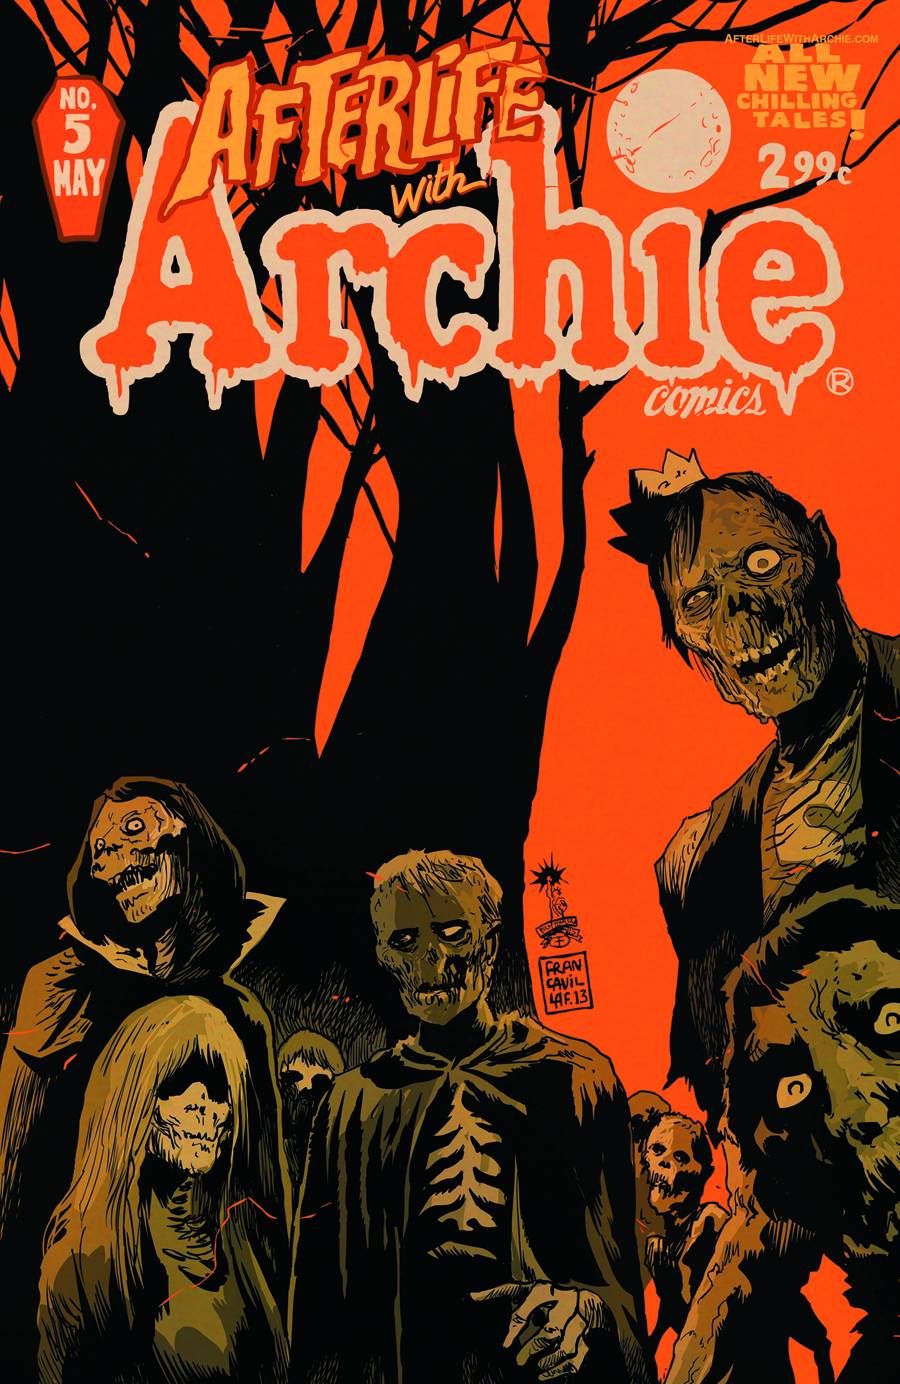 Afterlife With Archie #5 Comic